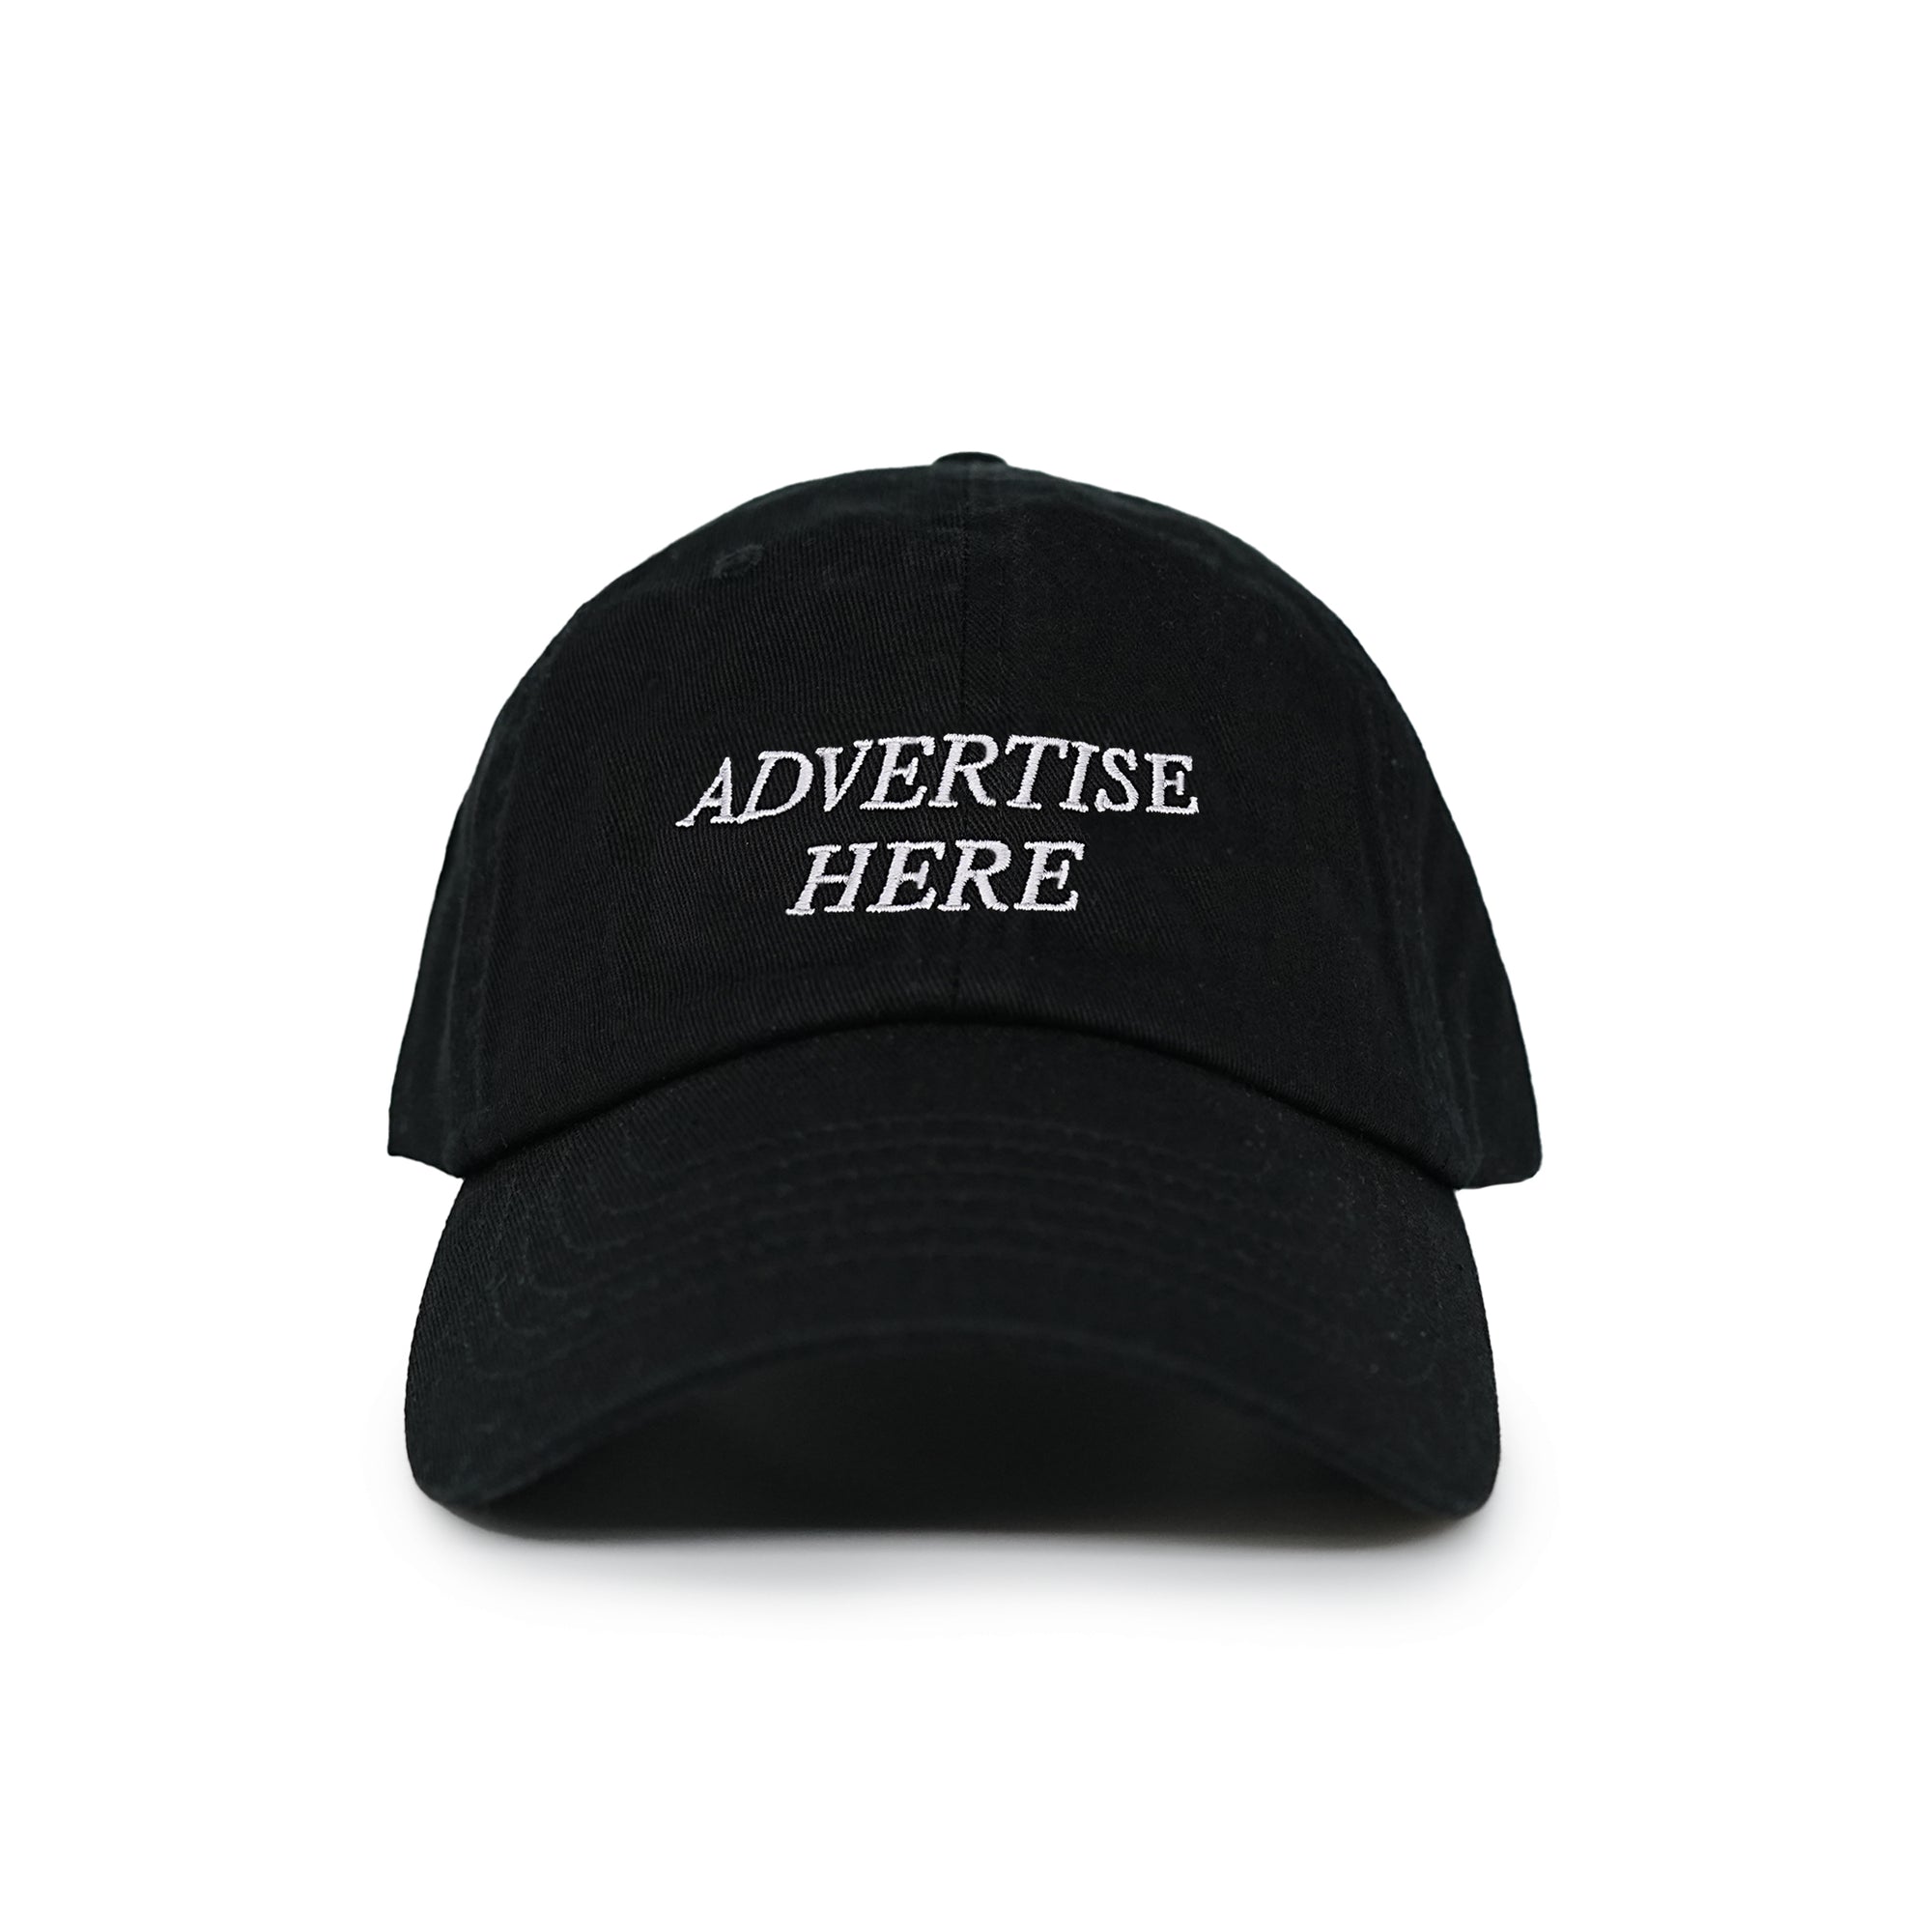 ADVERTISE HERE HAT